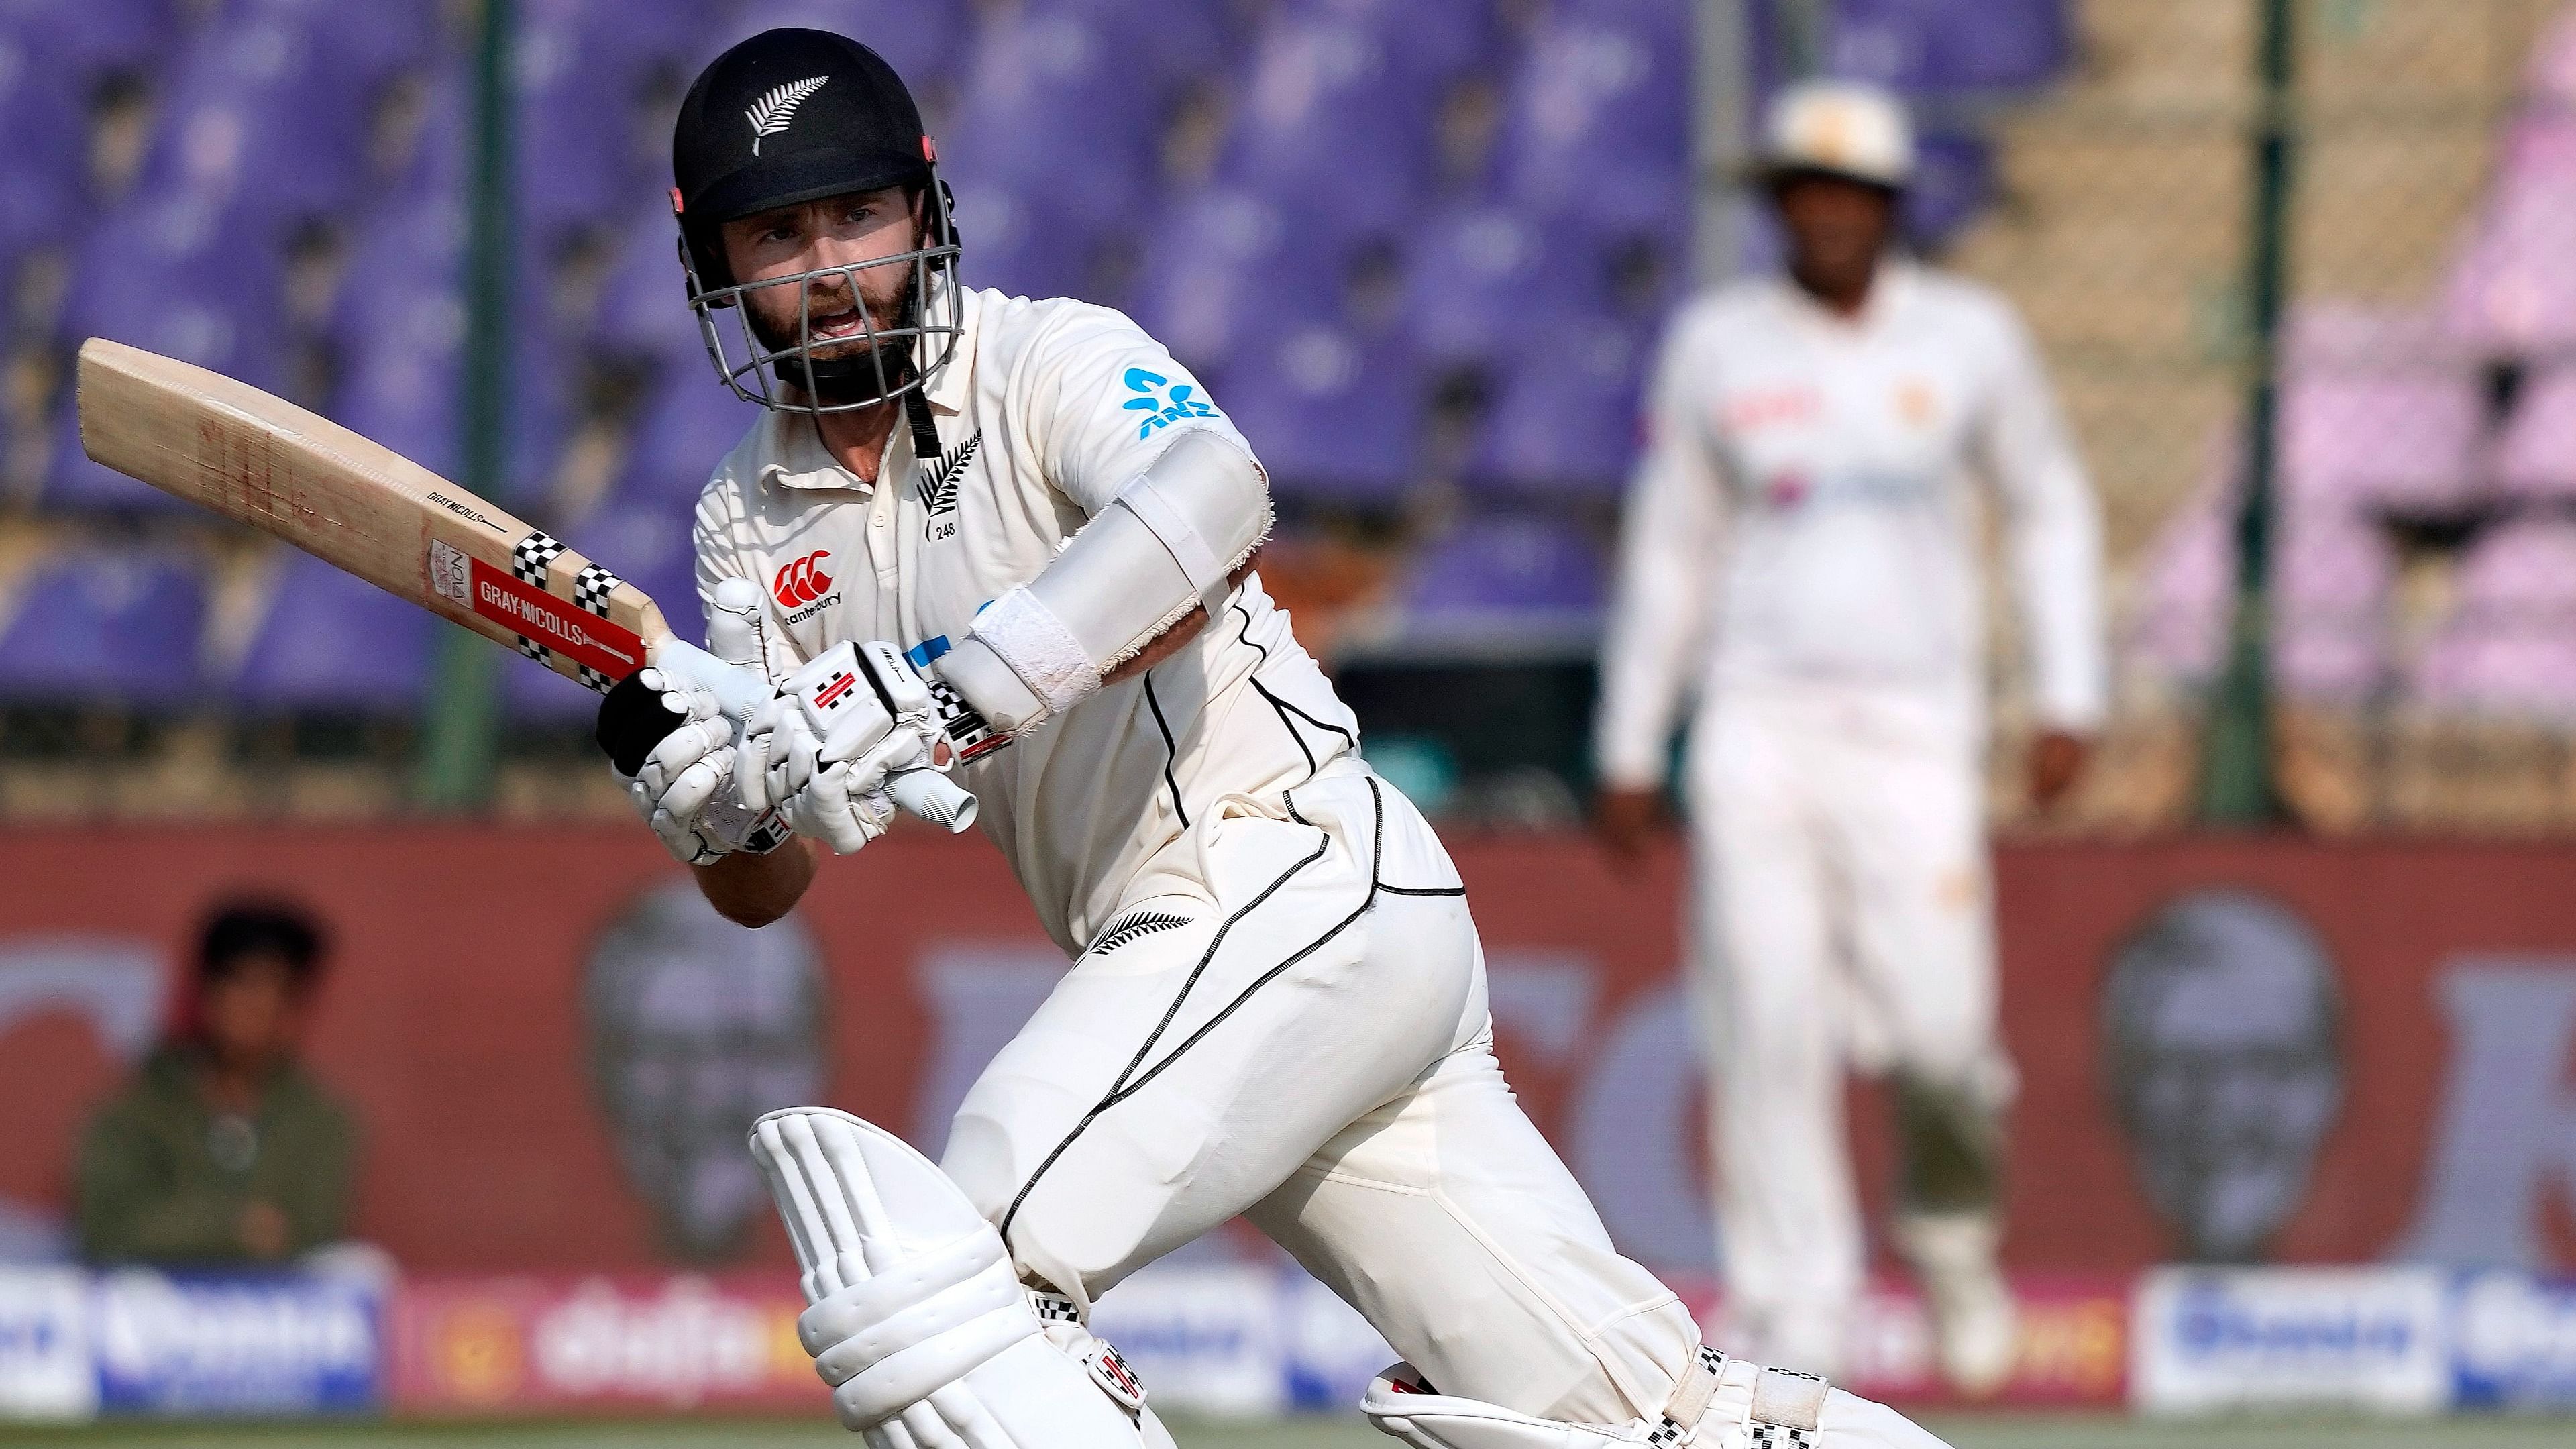 New Zealand's Kane Williamson plays a shot during the third day of first test cricket match between Pakistan and New Zealand. Credit: AP Photo